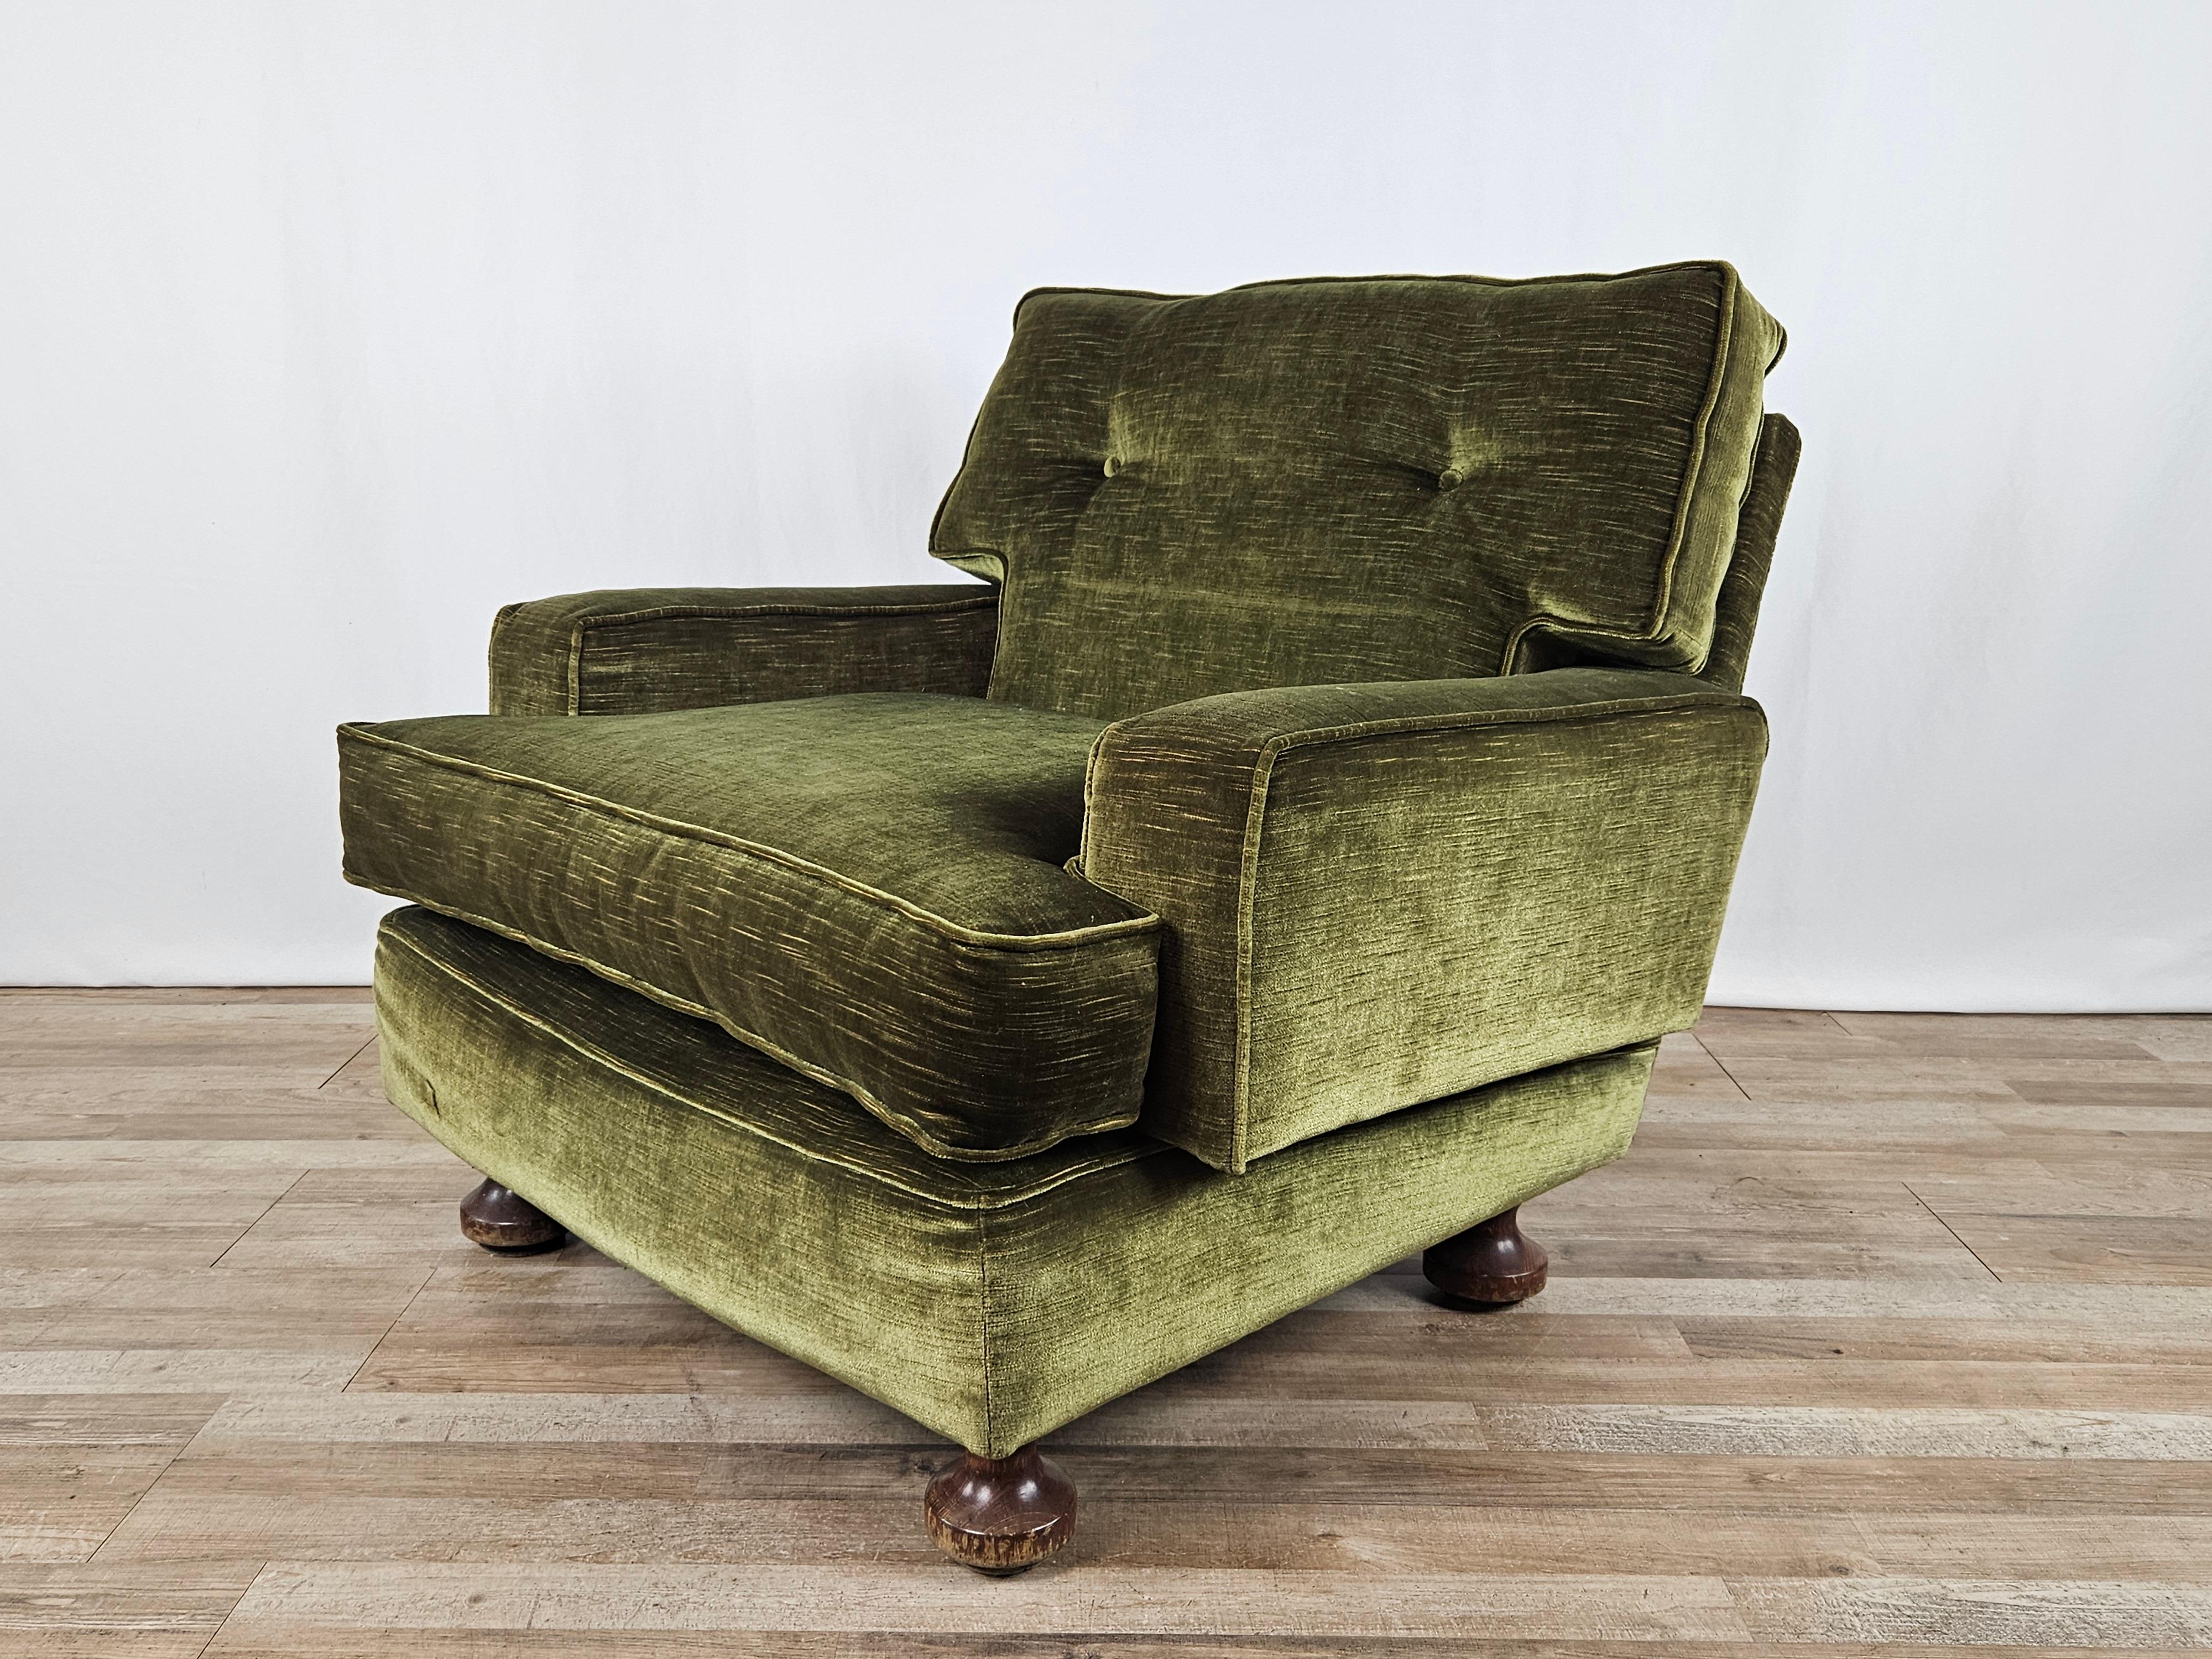 Vintage armchair upholstered in forest green fabric, Italian production 1970s.

Removable seat and back cushions, it also has very comfortable armrests for relaxing moments in the office or at home.

The chair shows normal signs of wear and tear due